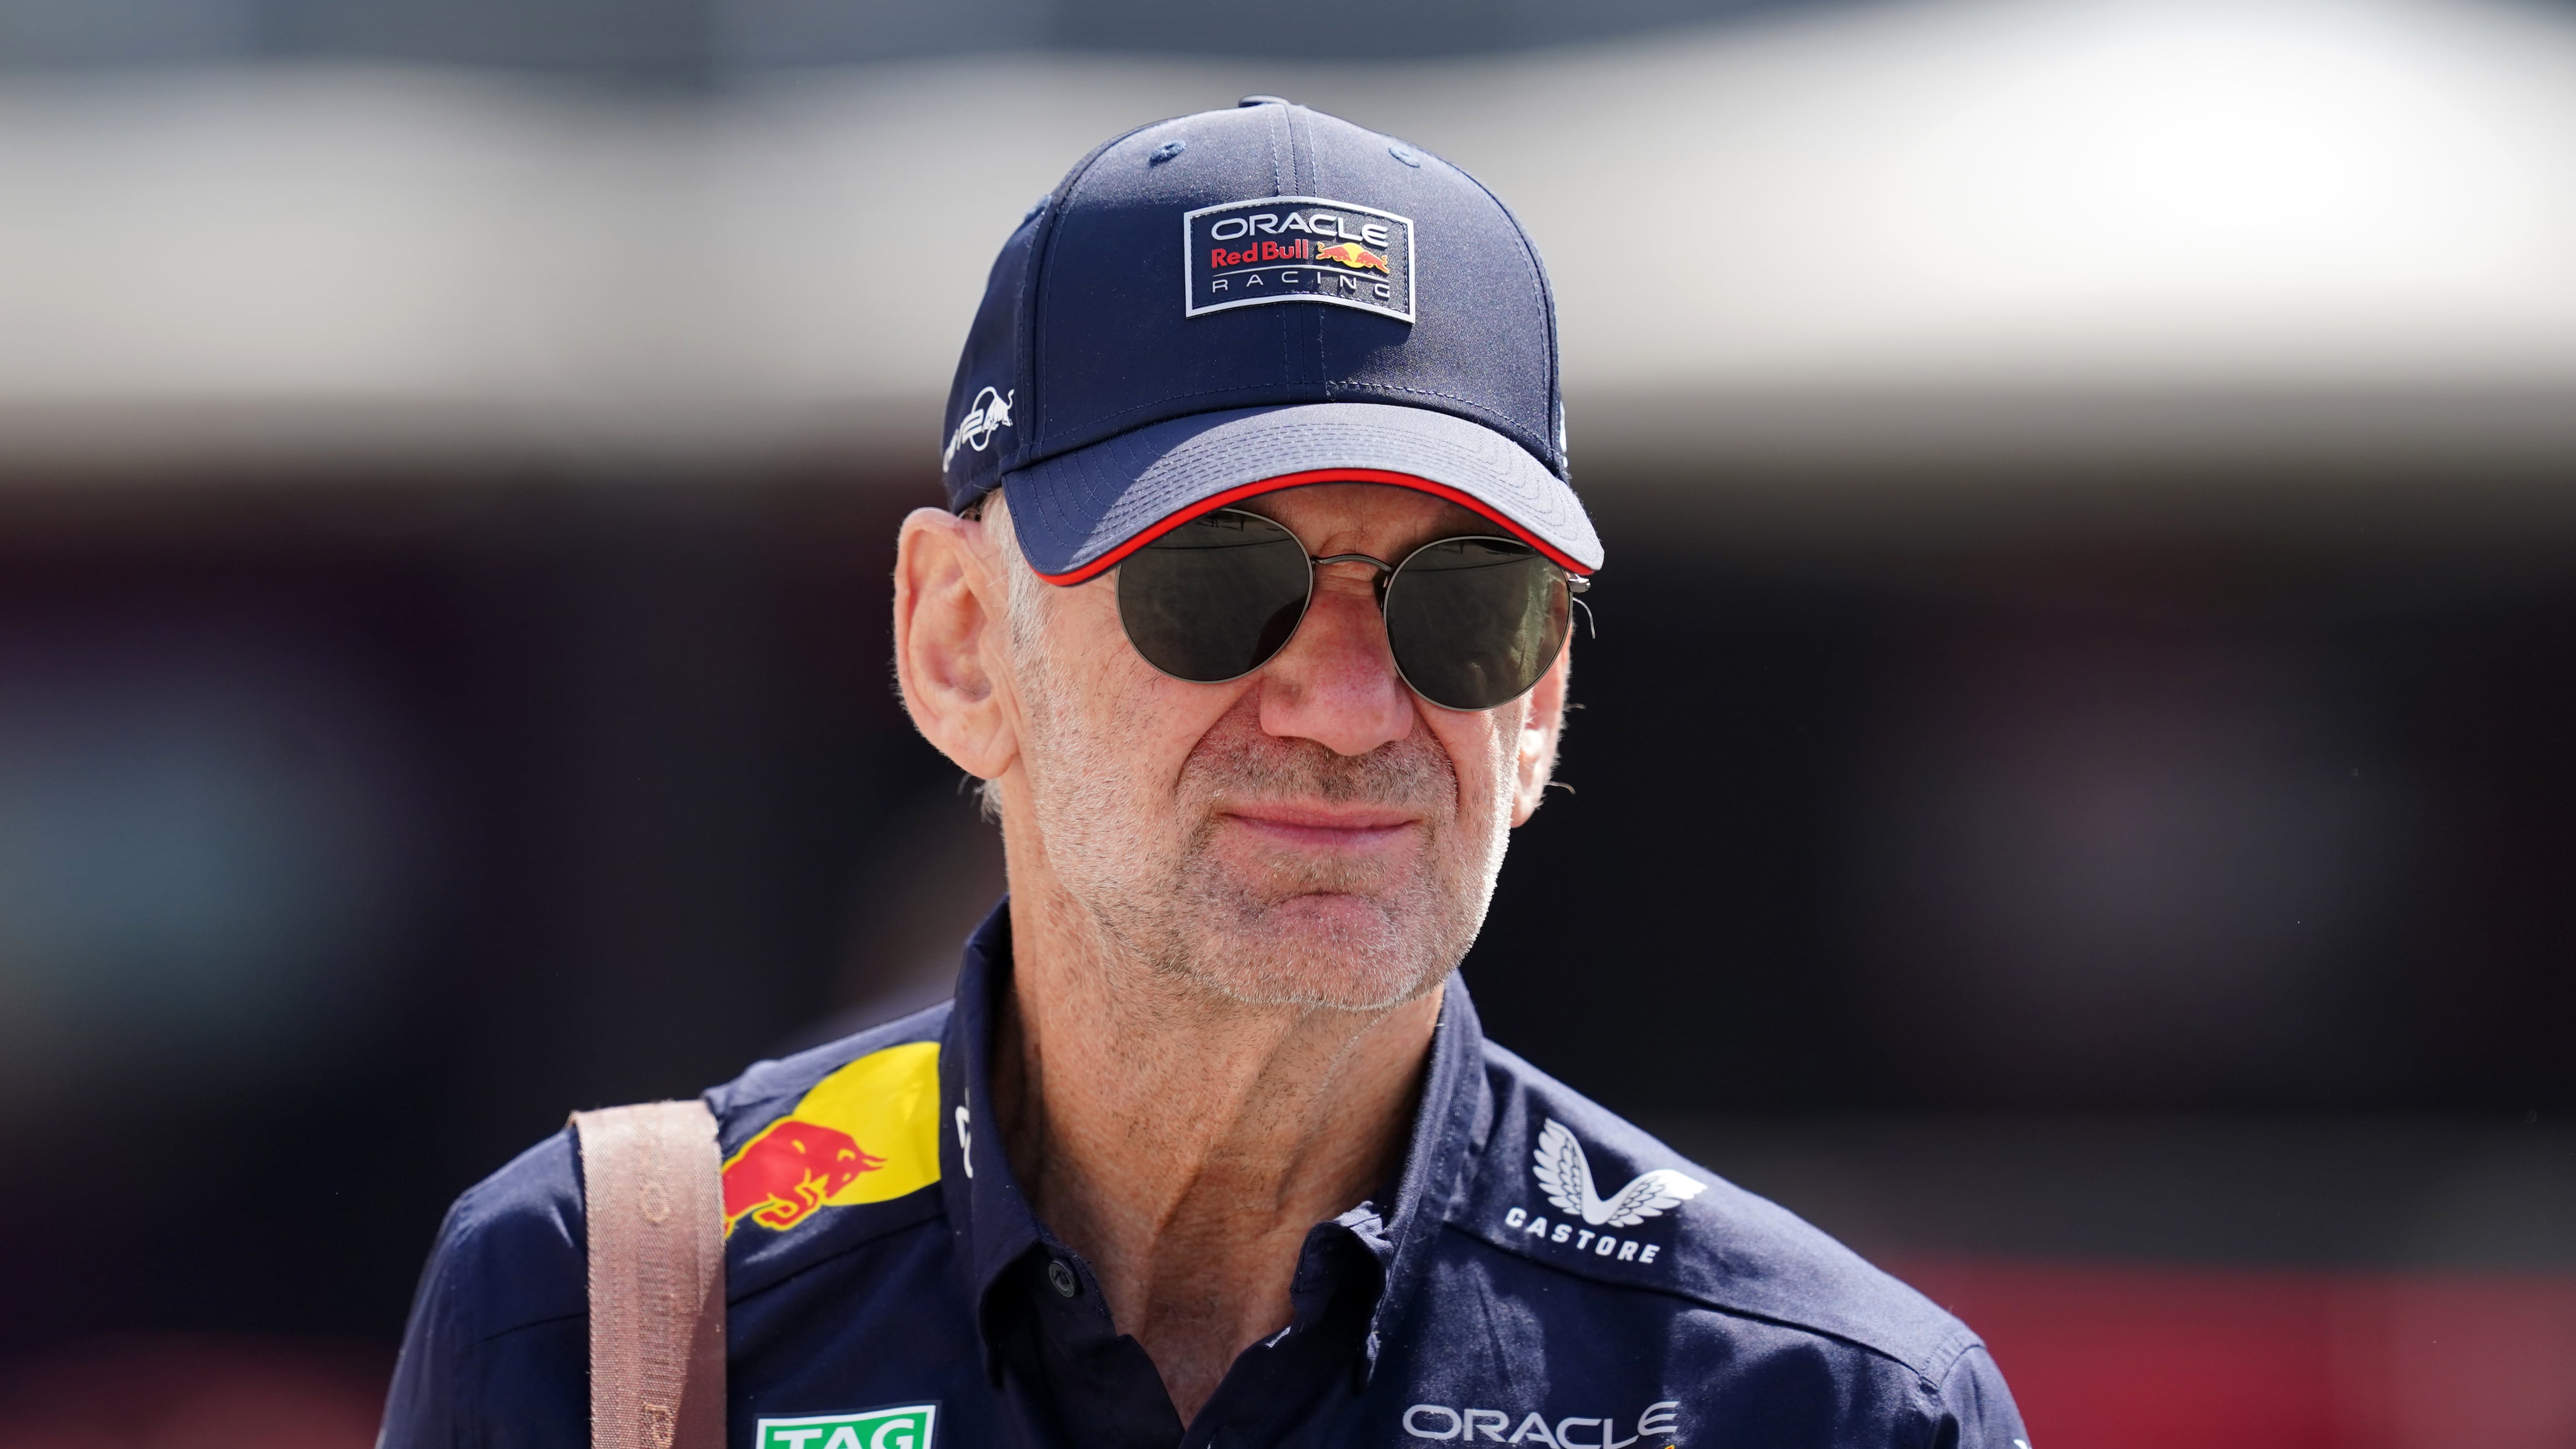 Could Adrian Newey be leaving Red Bull?